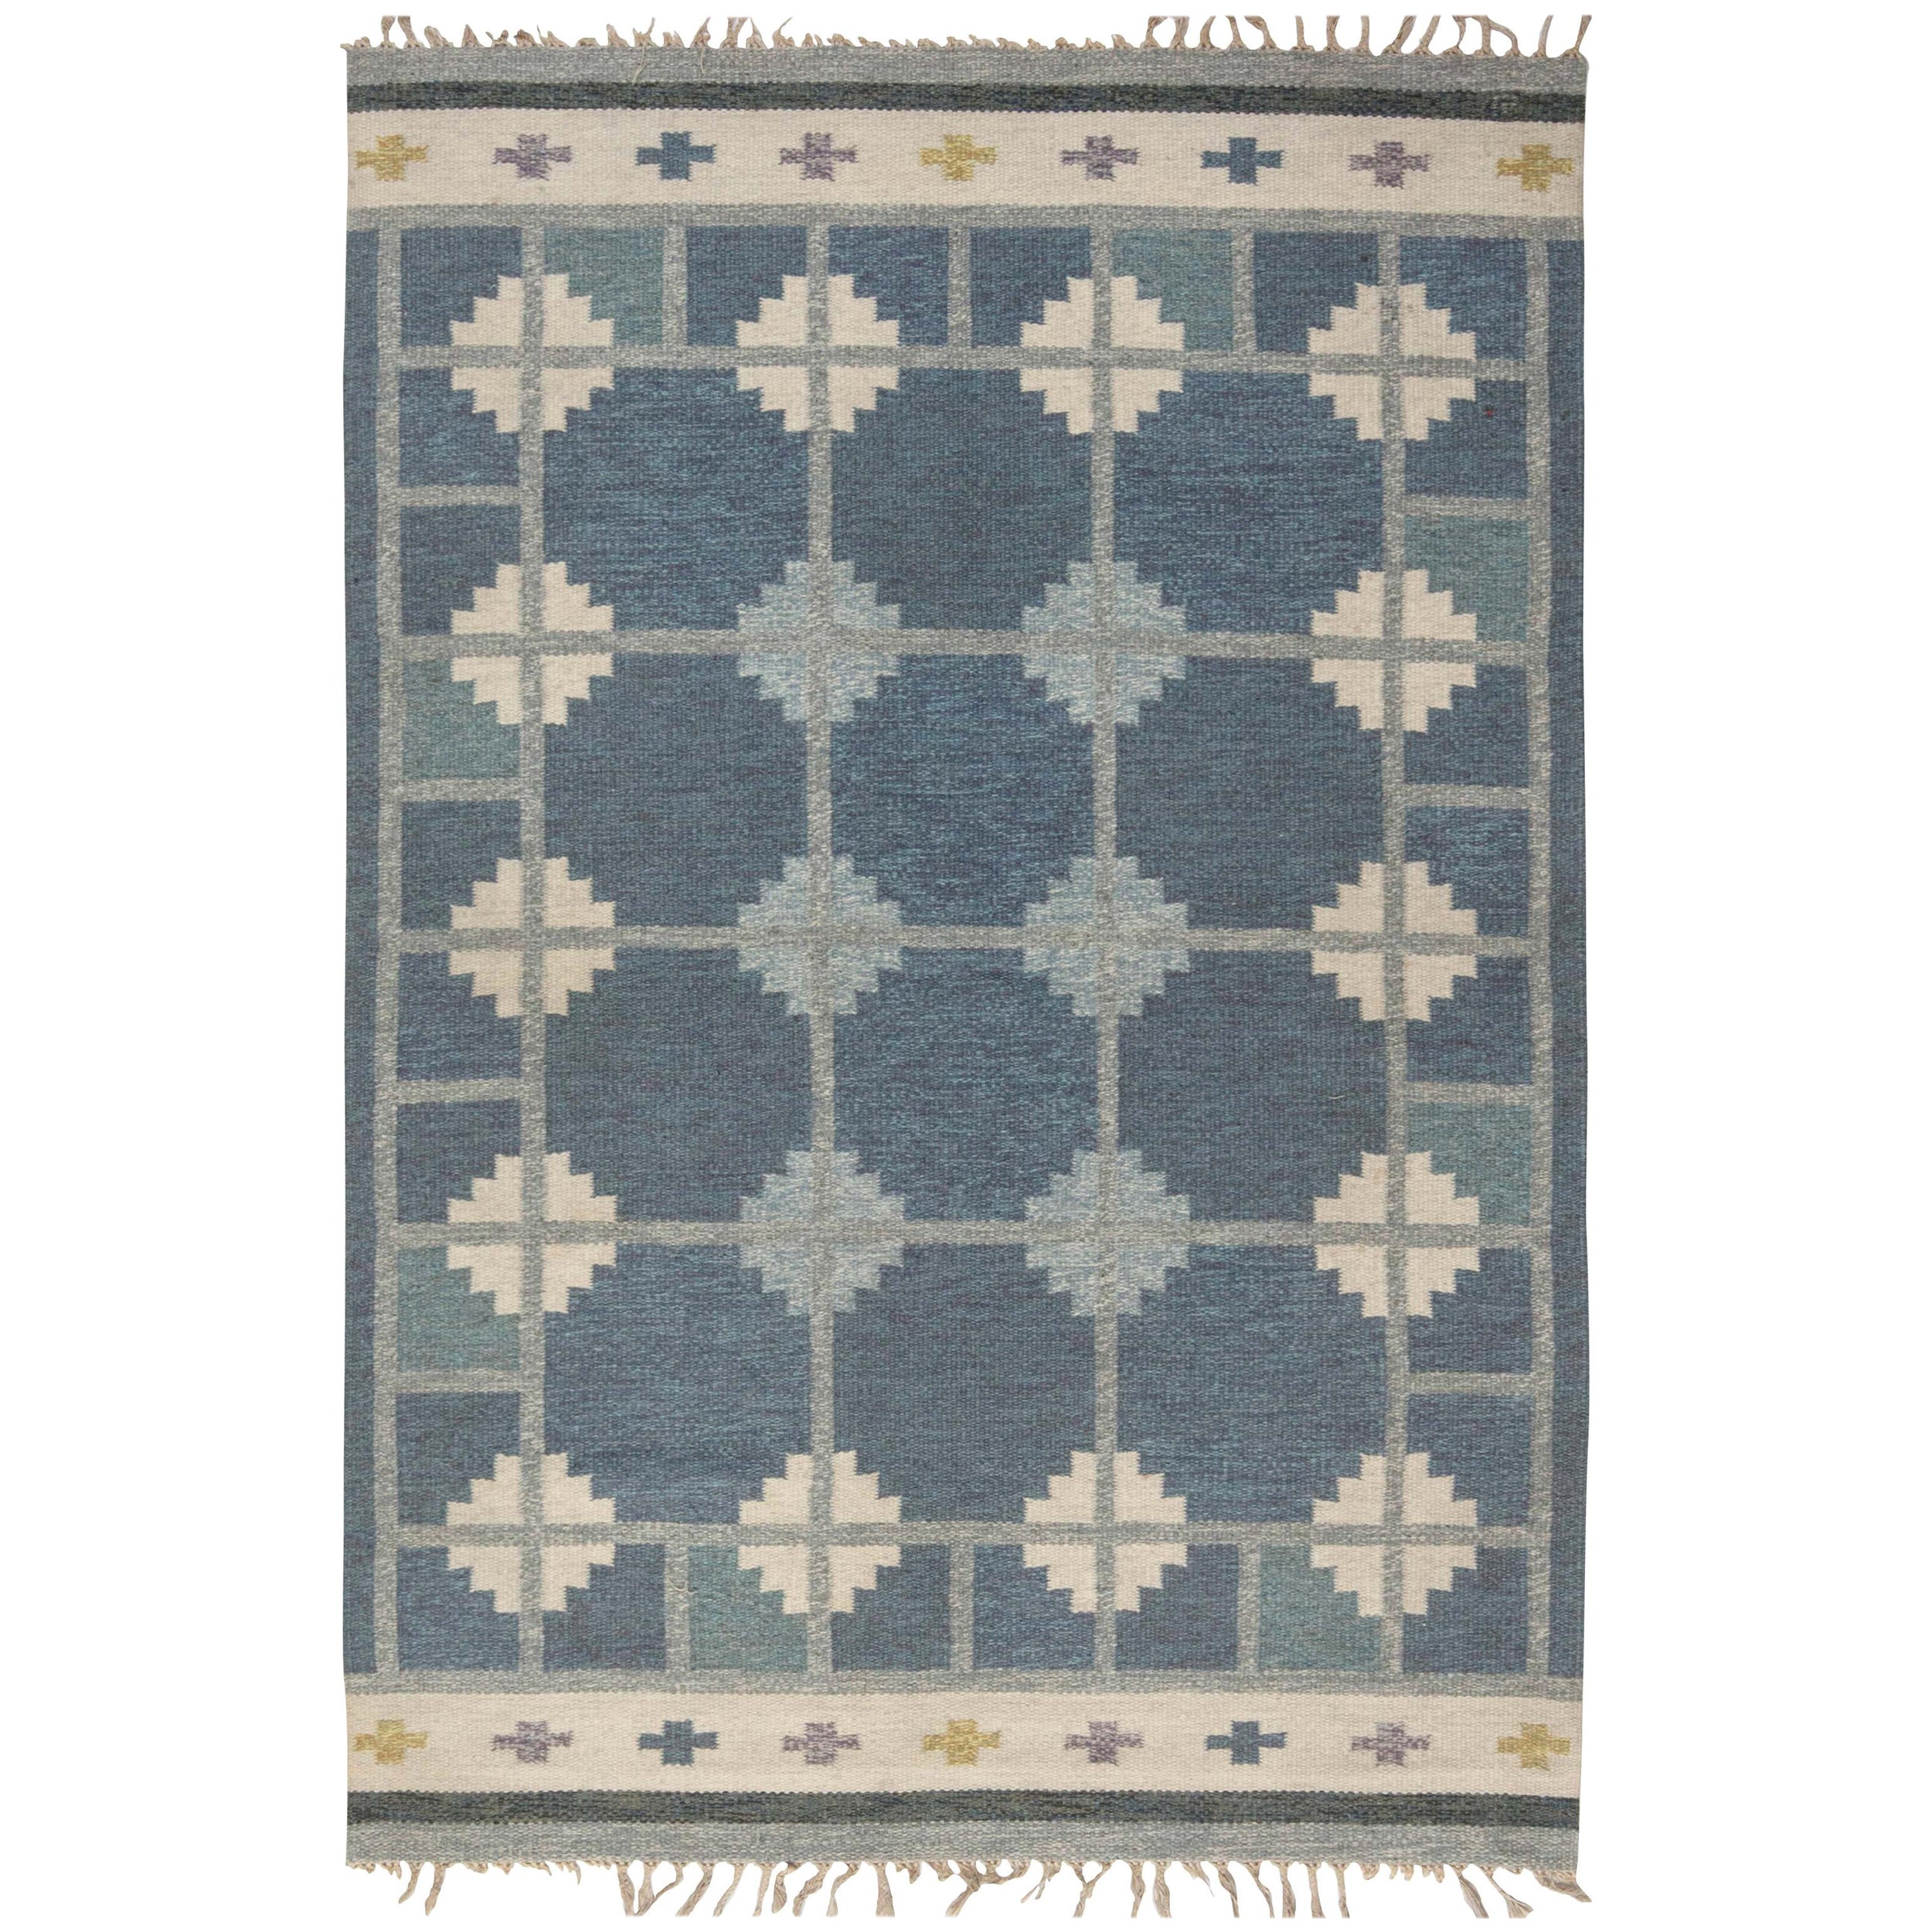 Mid-20th Century Blue, Gray, Ivory Swedish "Snowflake" Rug by Ingegerd Silow For Sale